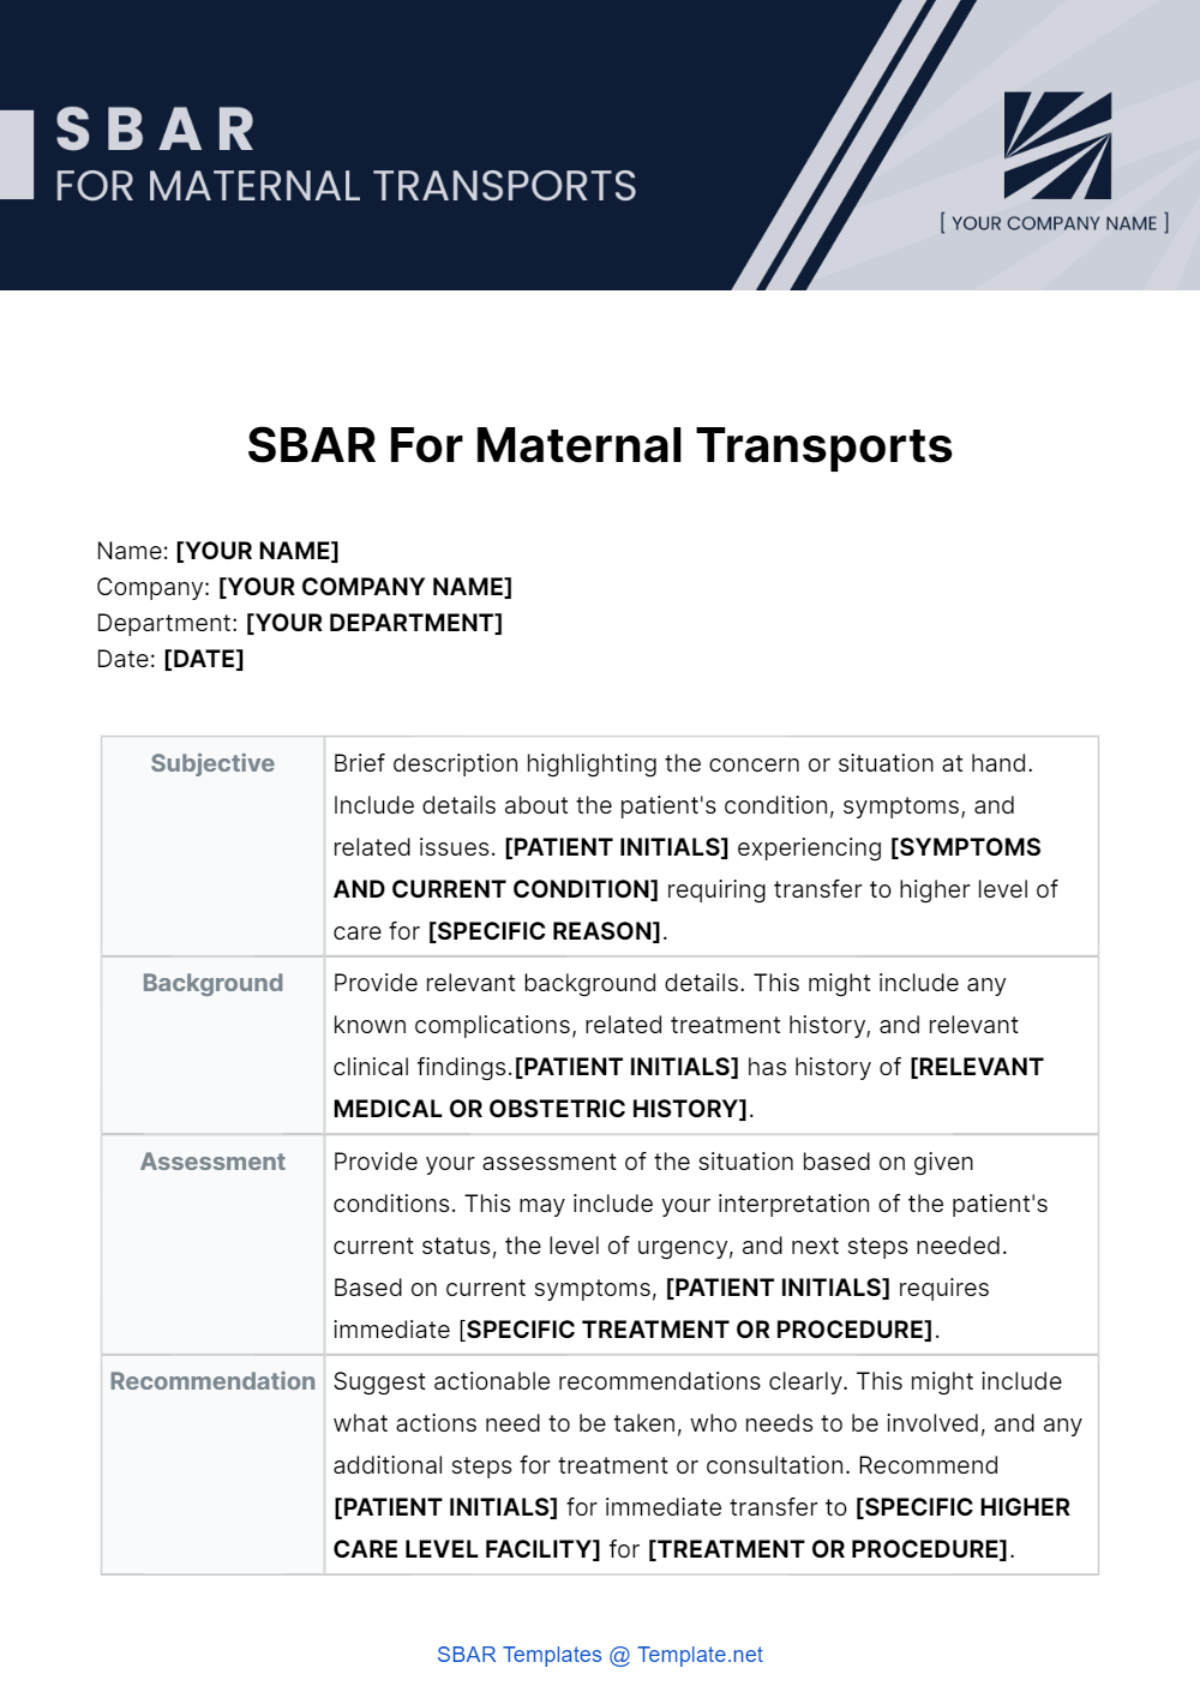 SBAR for Maternal Transports Template